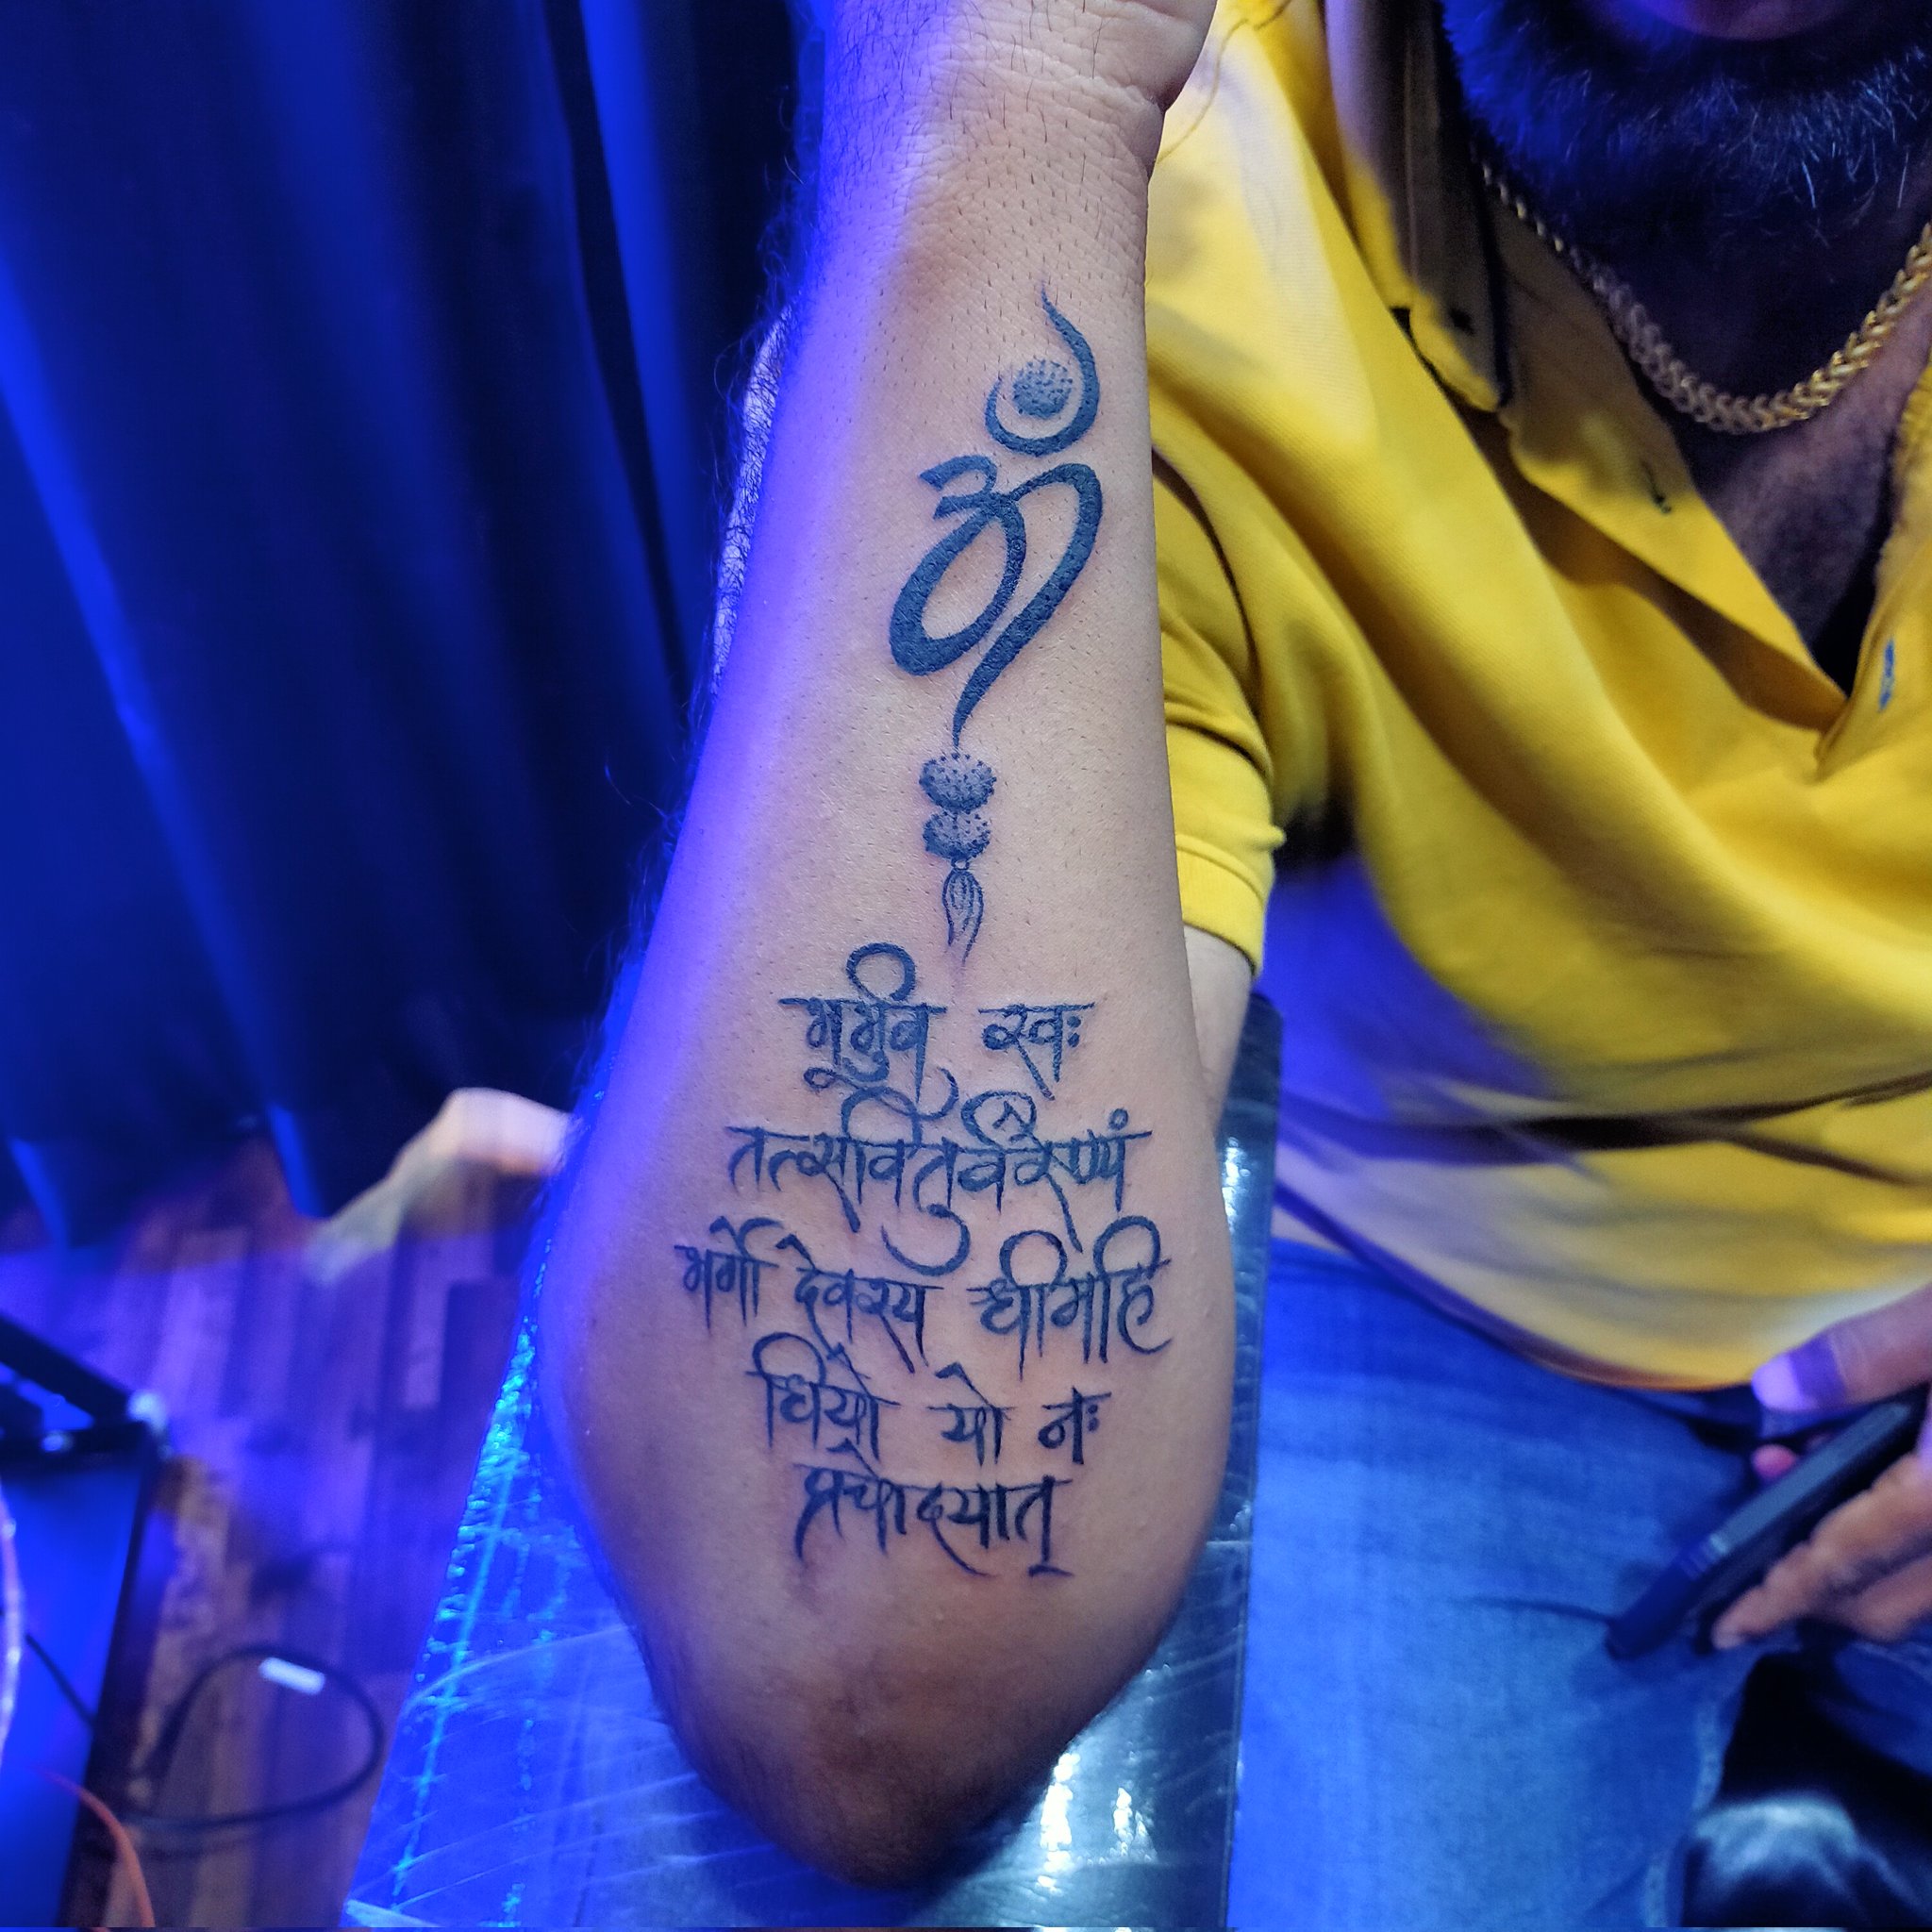 Aries Tattoo- Noida - Gaytri Mantra Band Done by Ash @tattooistak Get your  custom band Tattoo with you. We offer you the best tattoo design. Check out  our Instagram @ariestattoonoida #tattoo #tattoos #